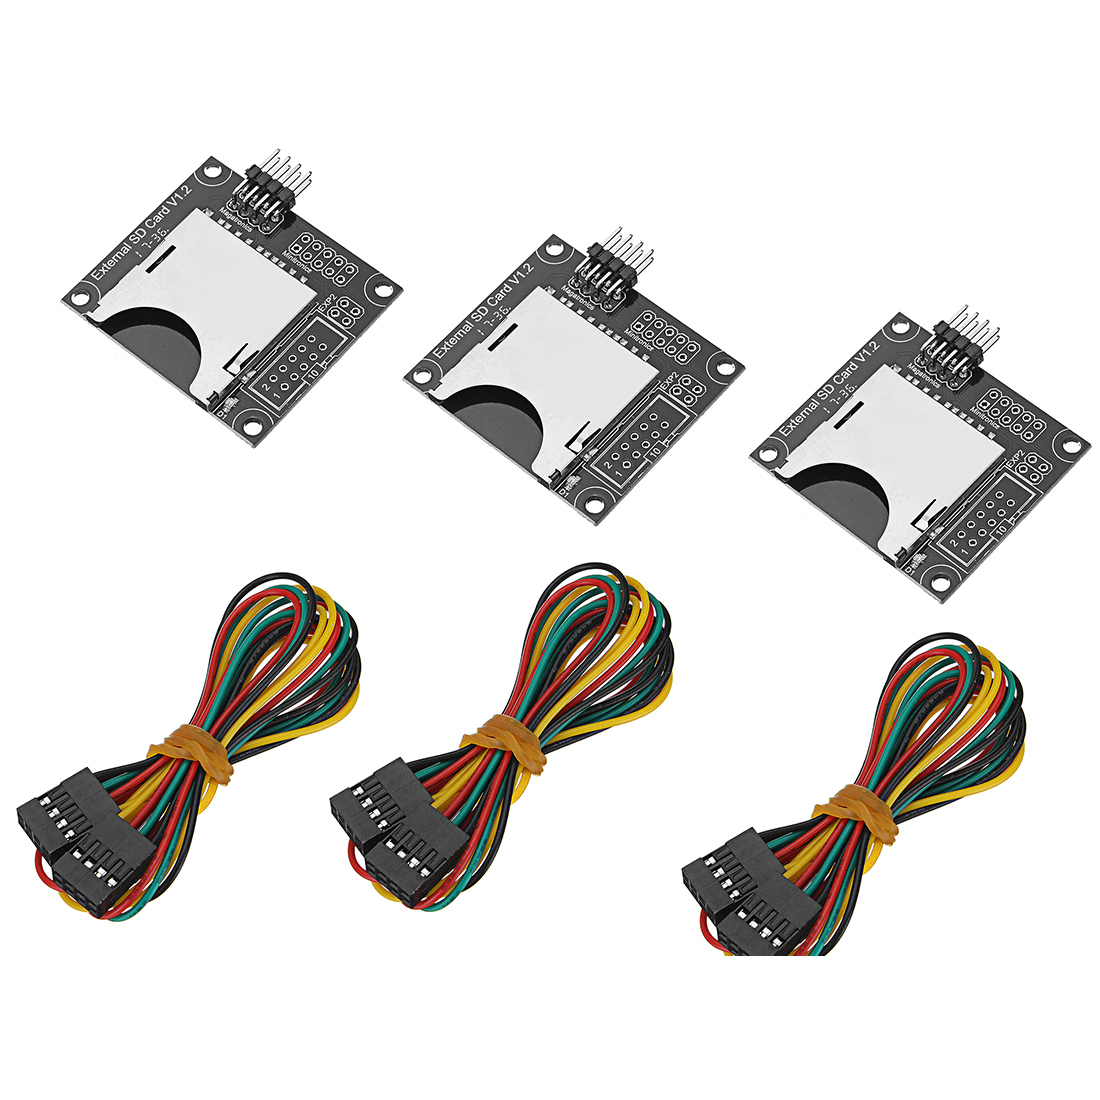 

3pcs 45*40mm Independent External SD Card Slot Module with 20cm Dupont Cable 3D Printer Accessories